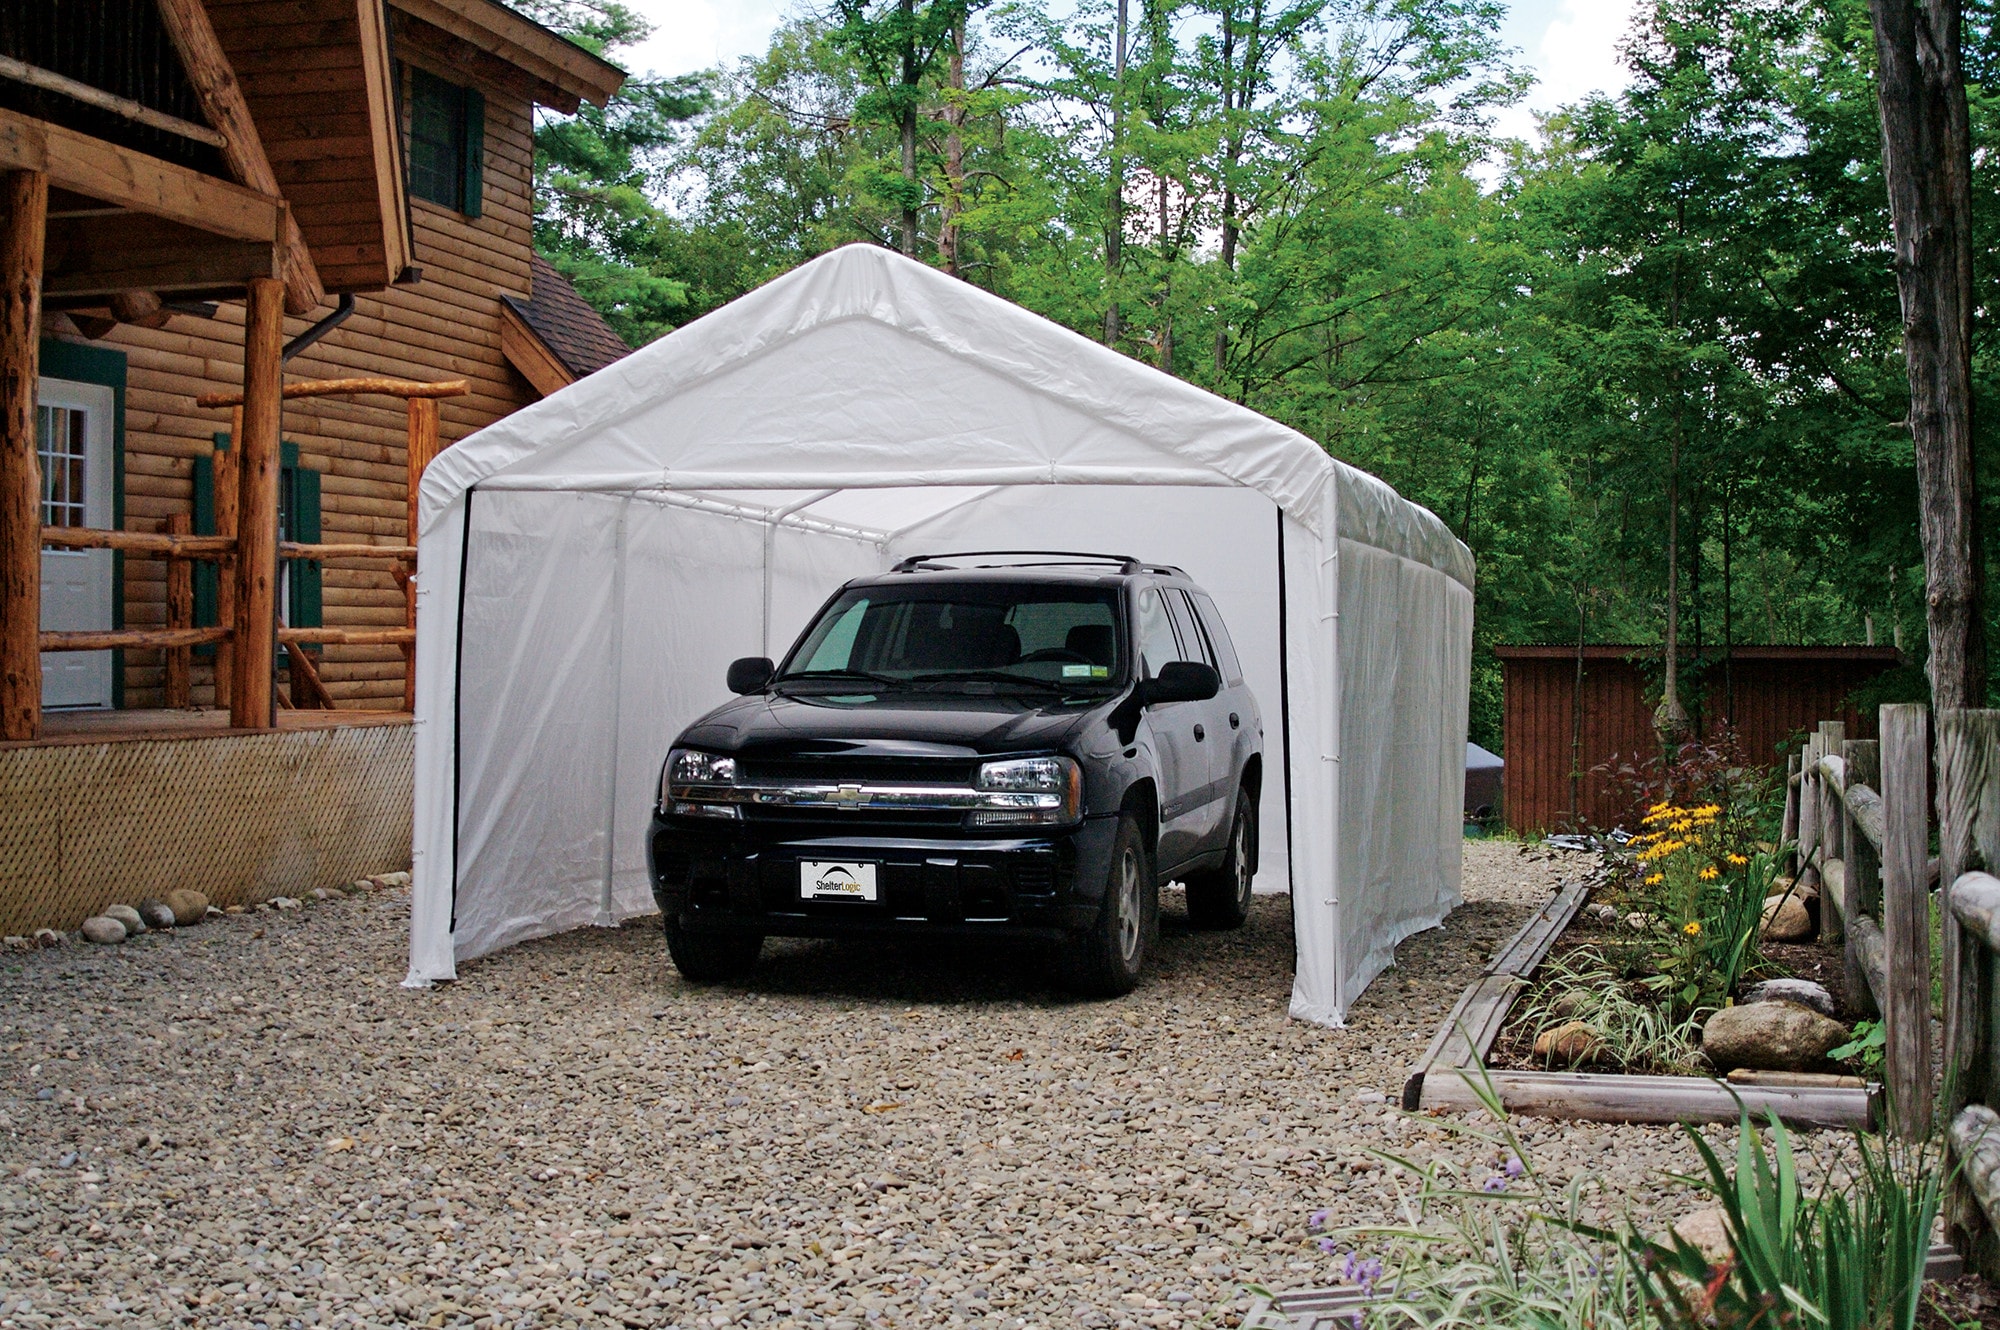 ShelterLogic Accessories White Canopy Wall Panels in the Canopy